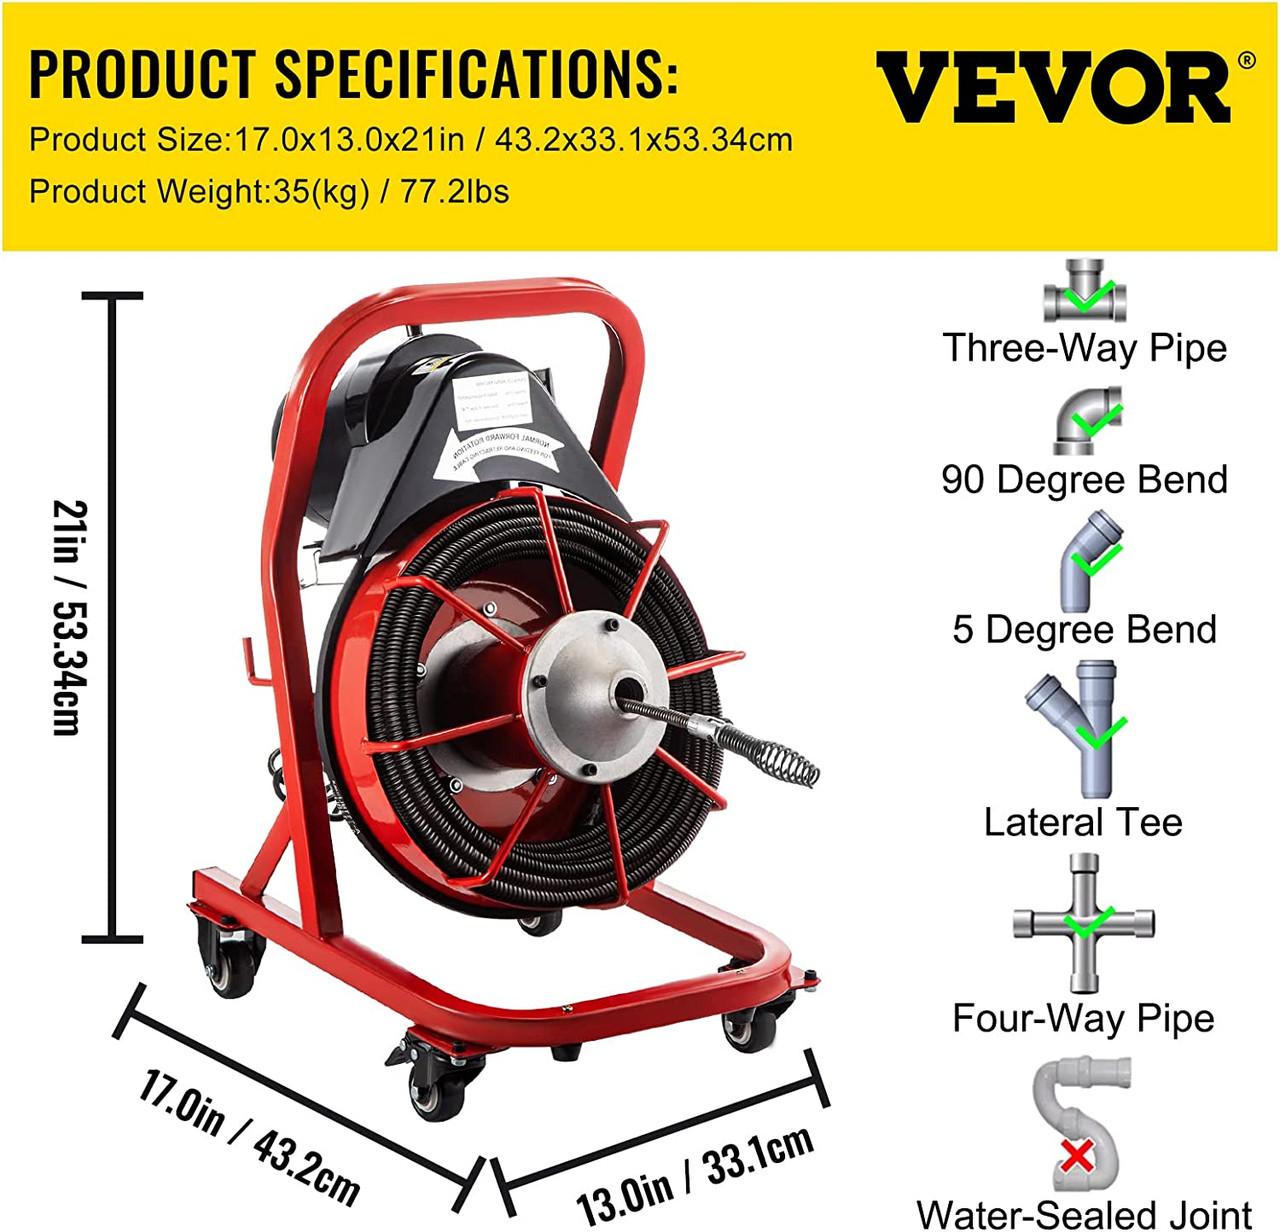 VEVOR Drain Cleaner 26'x1/3 Electric Drain Auger Plumbing Cleaning Machine 700W